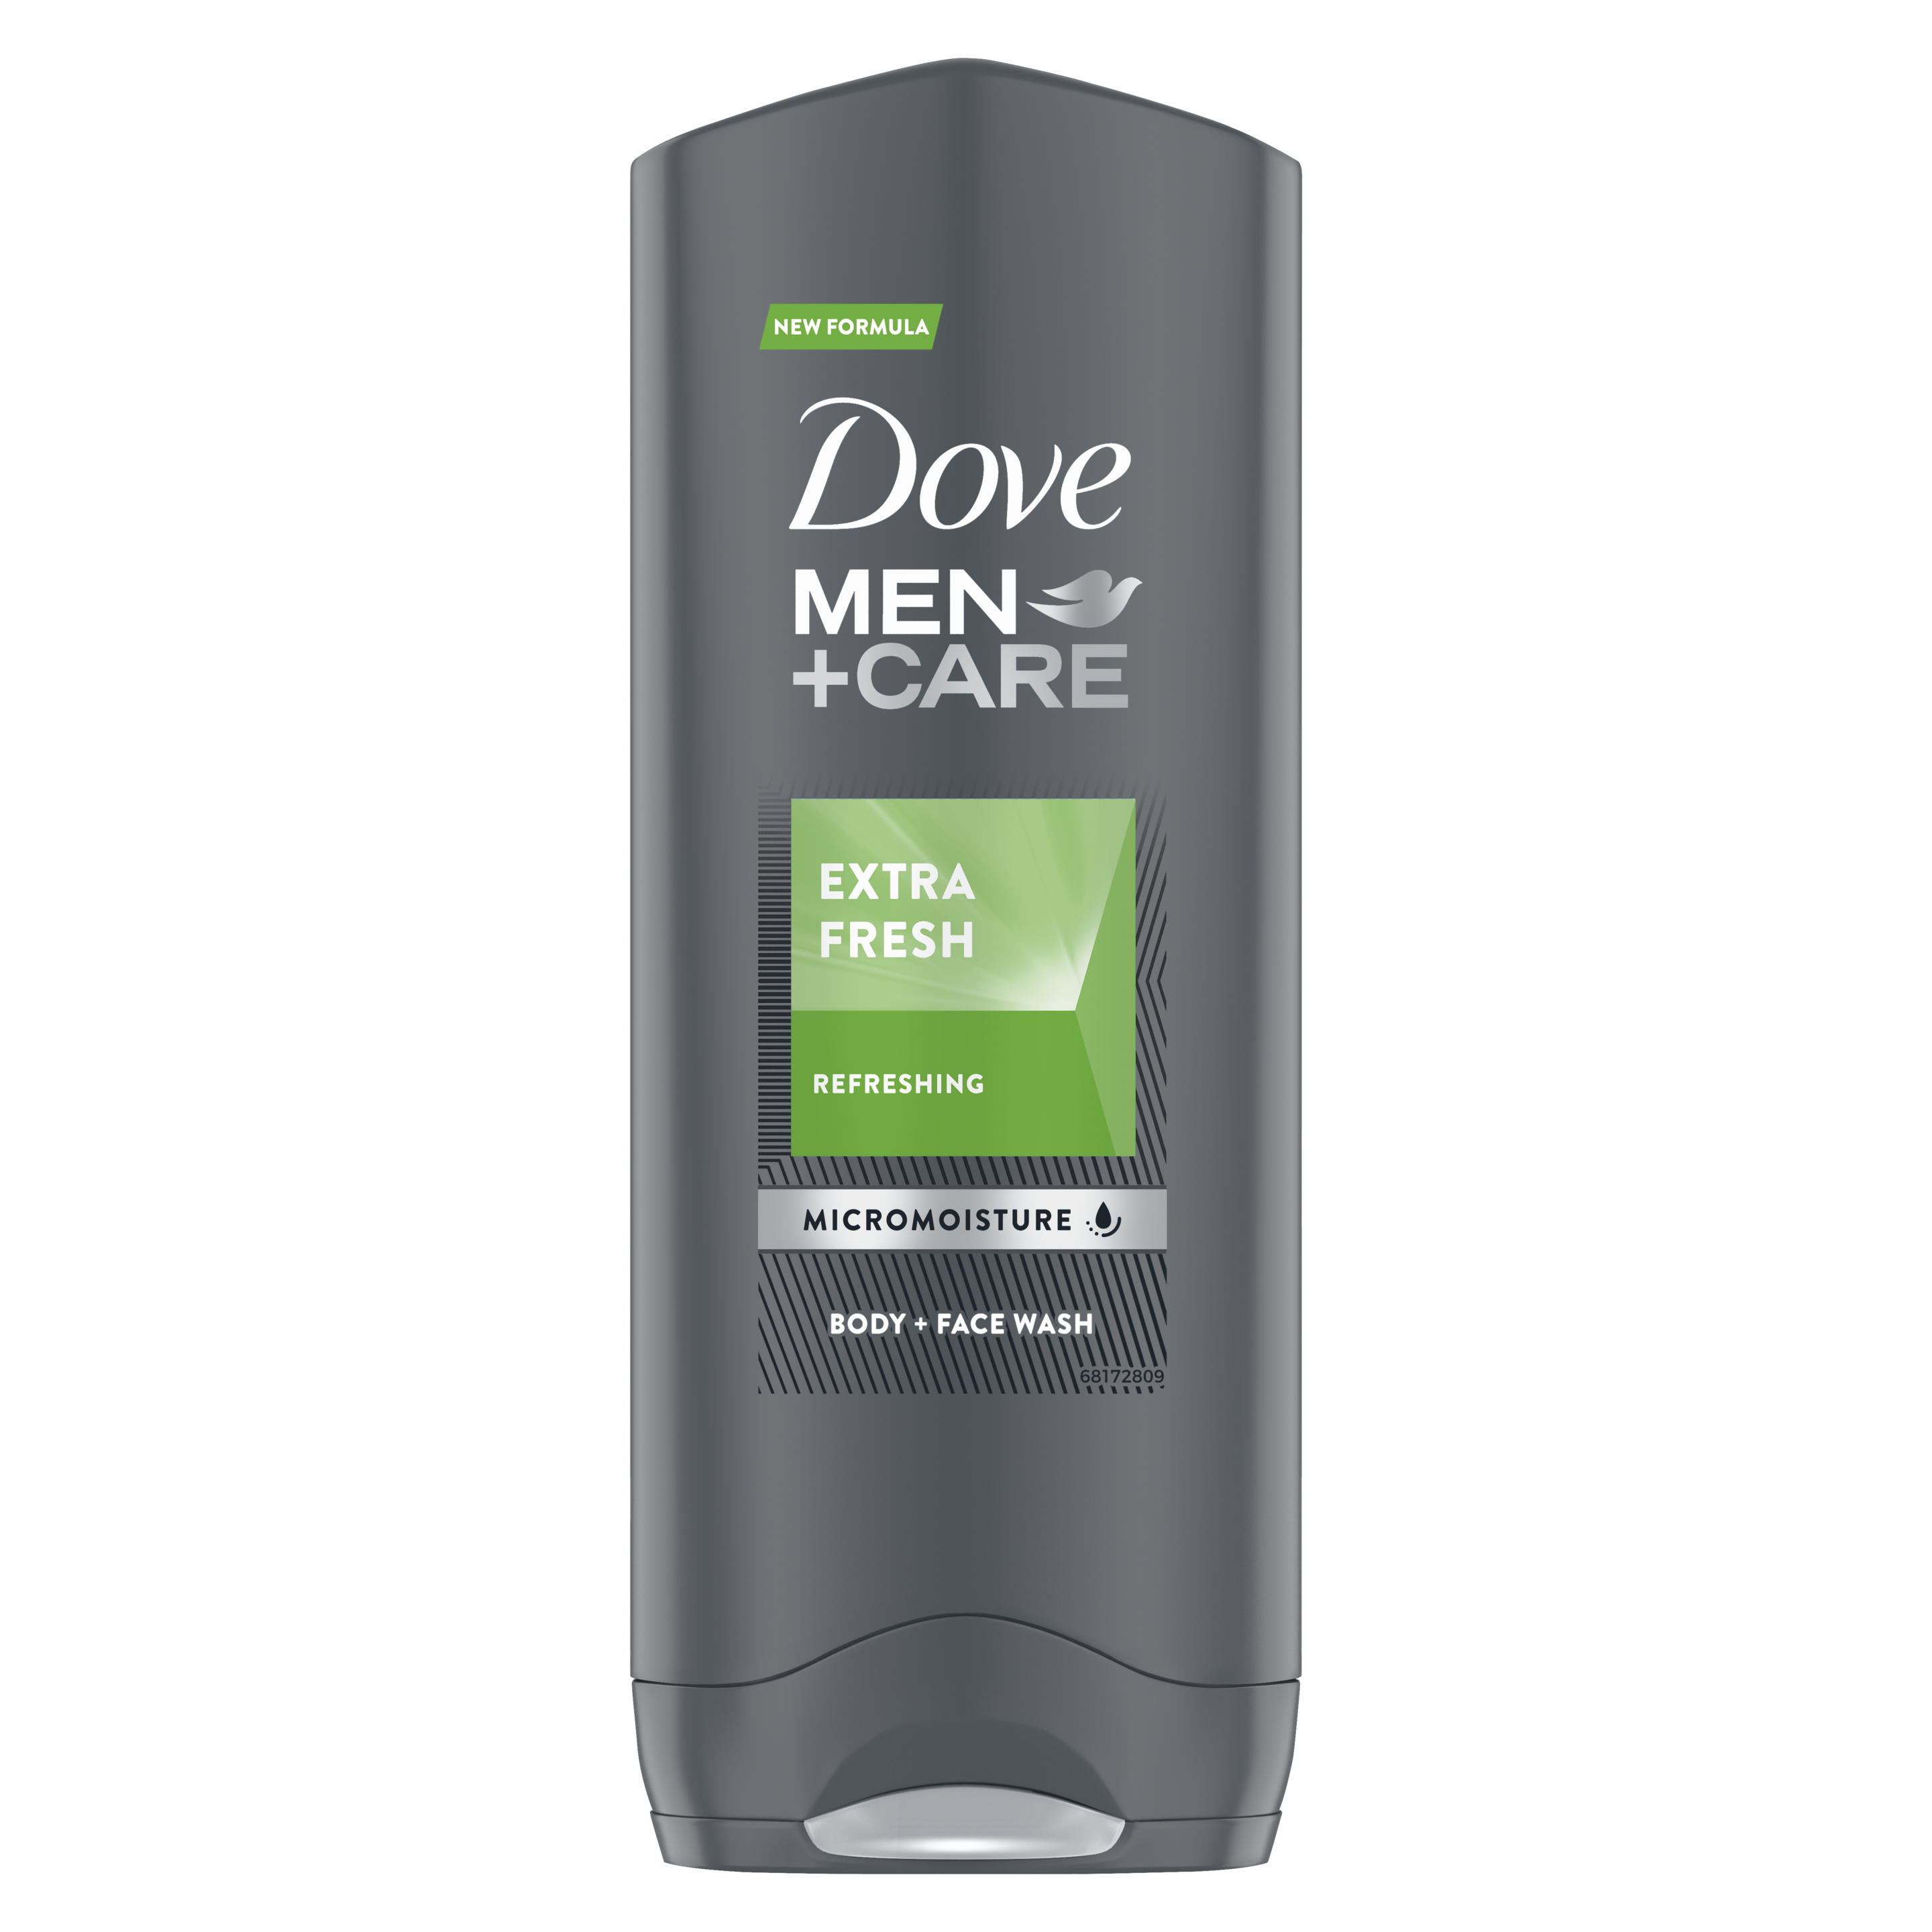 Dove Men+Care Extra Fresh body and face wash 250ml